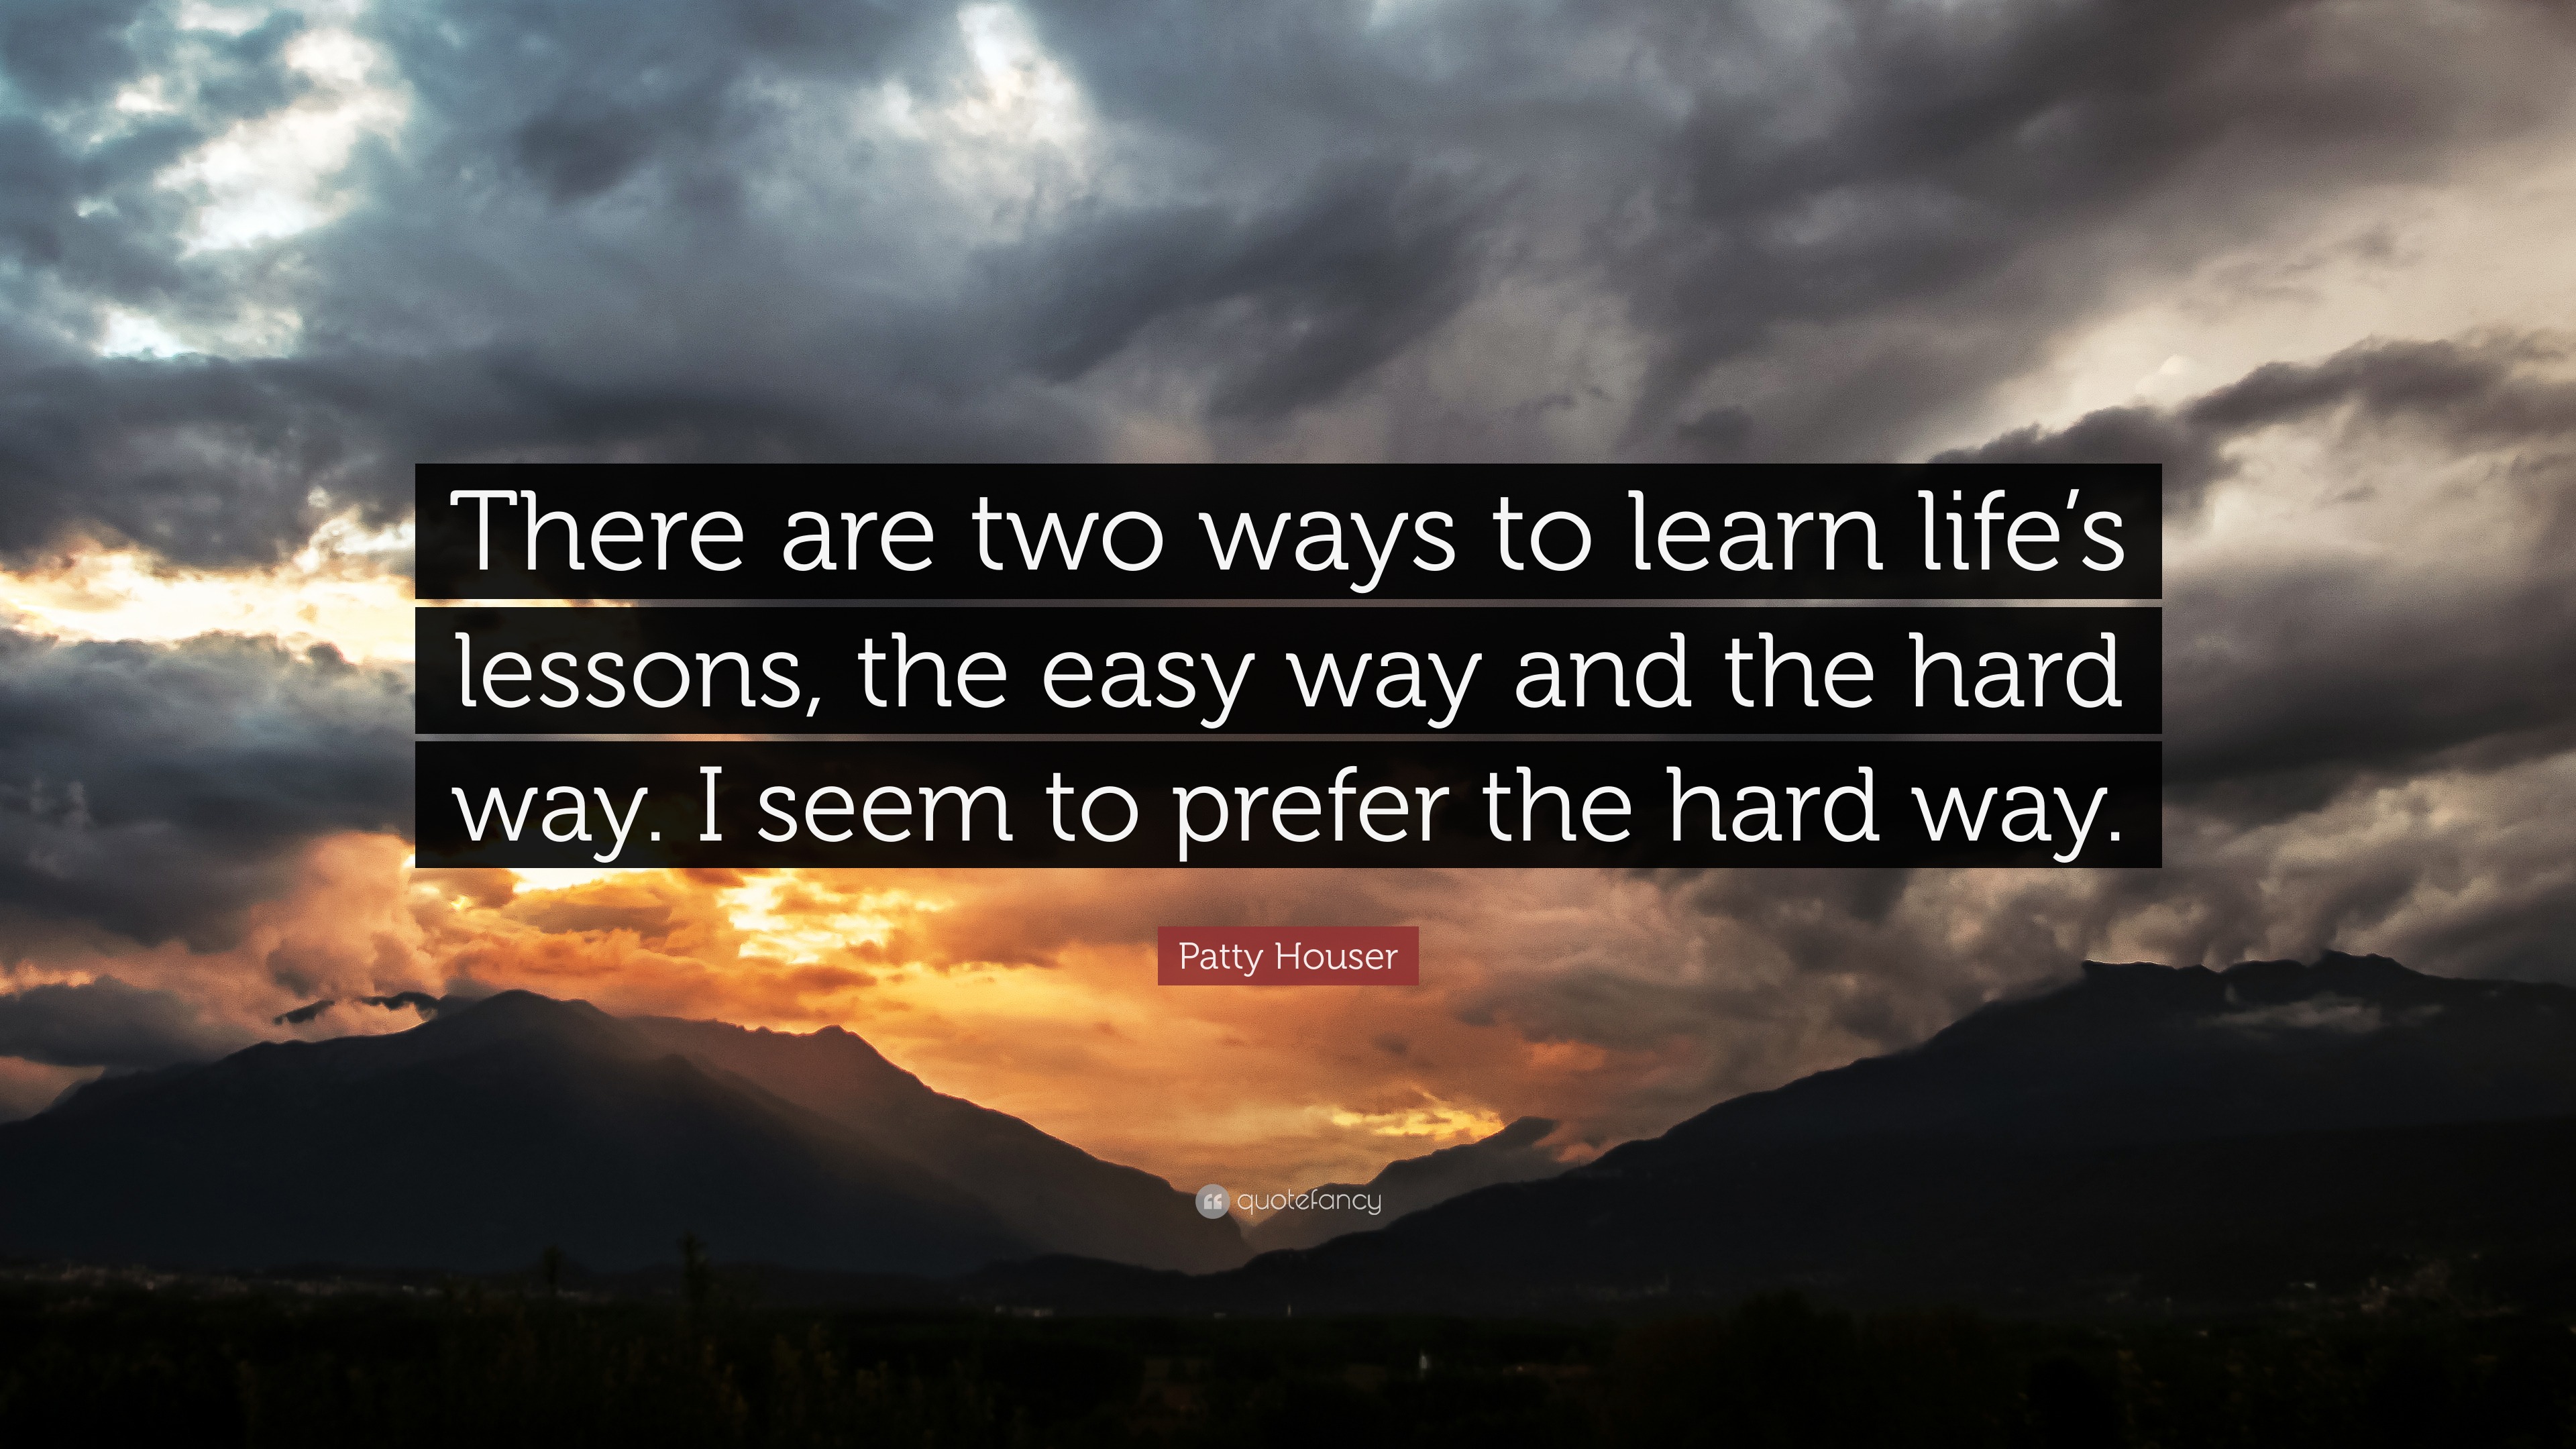 Patty Houser Quote: “There are two ways to learn life's lessons, the easy  way and the